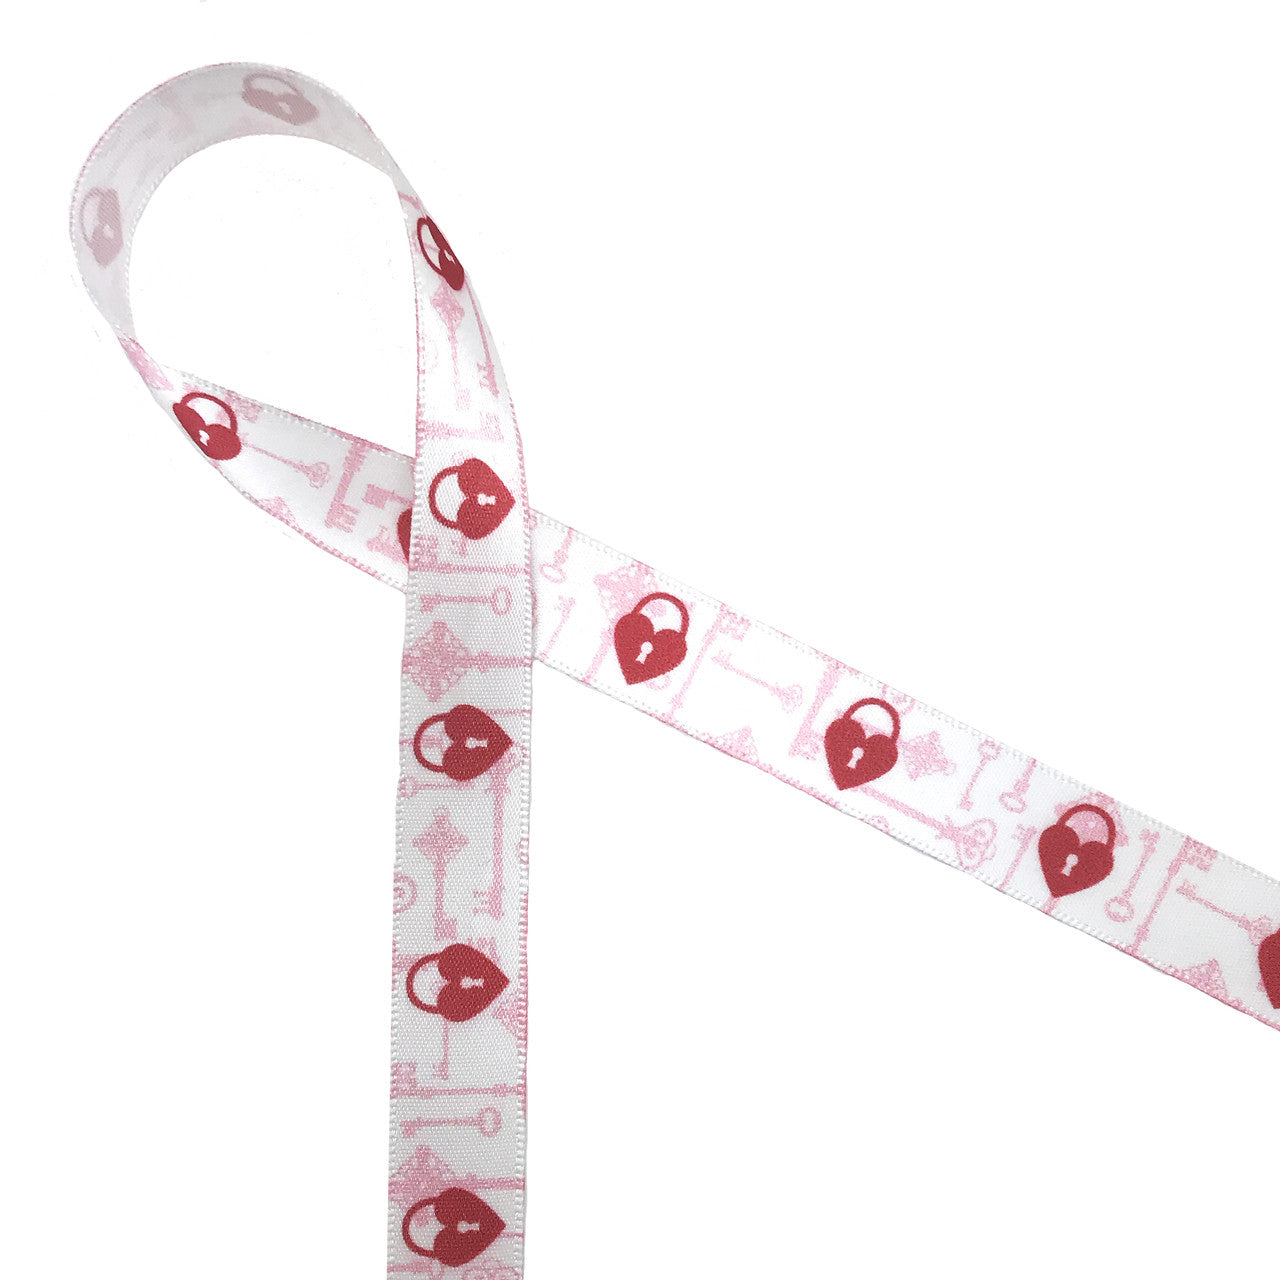 Red heart shaped locks run along a background of pink skeleton keys on 5/8" white single face satin. Be sure to give the key to your heart message to your special person with this fun Valentine ribbon!